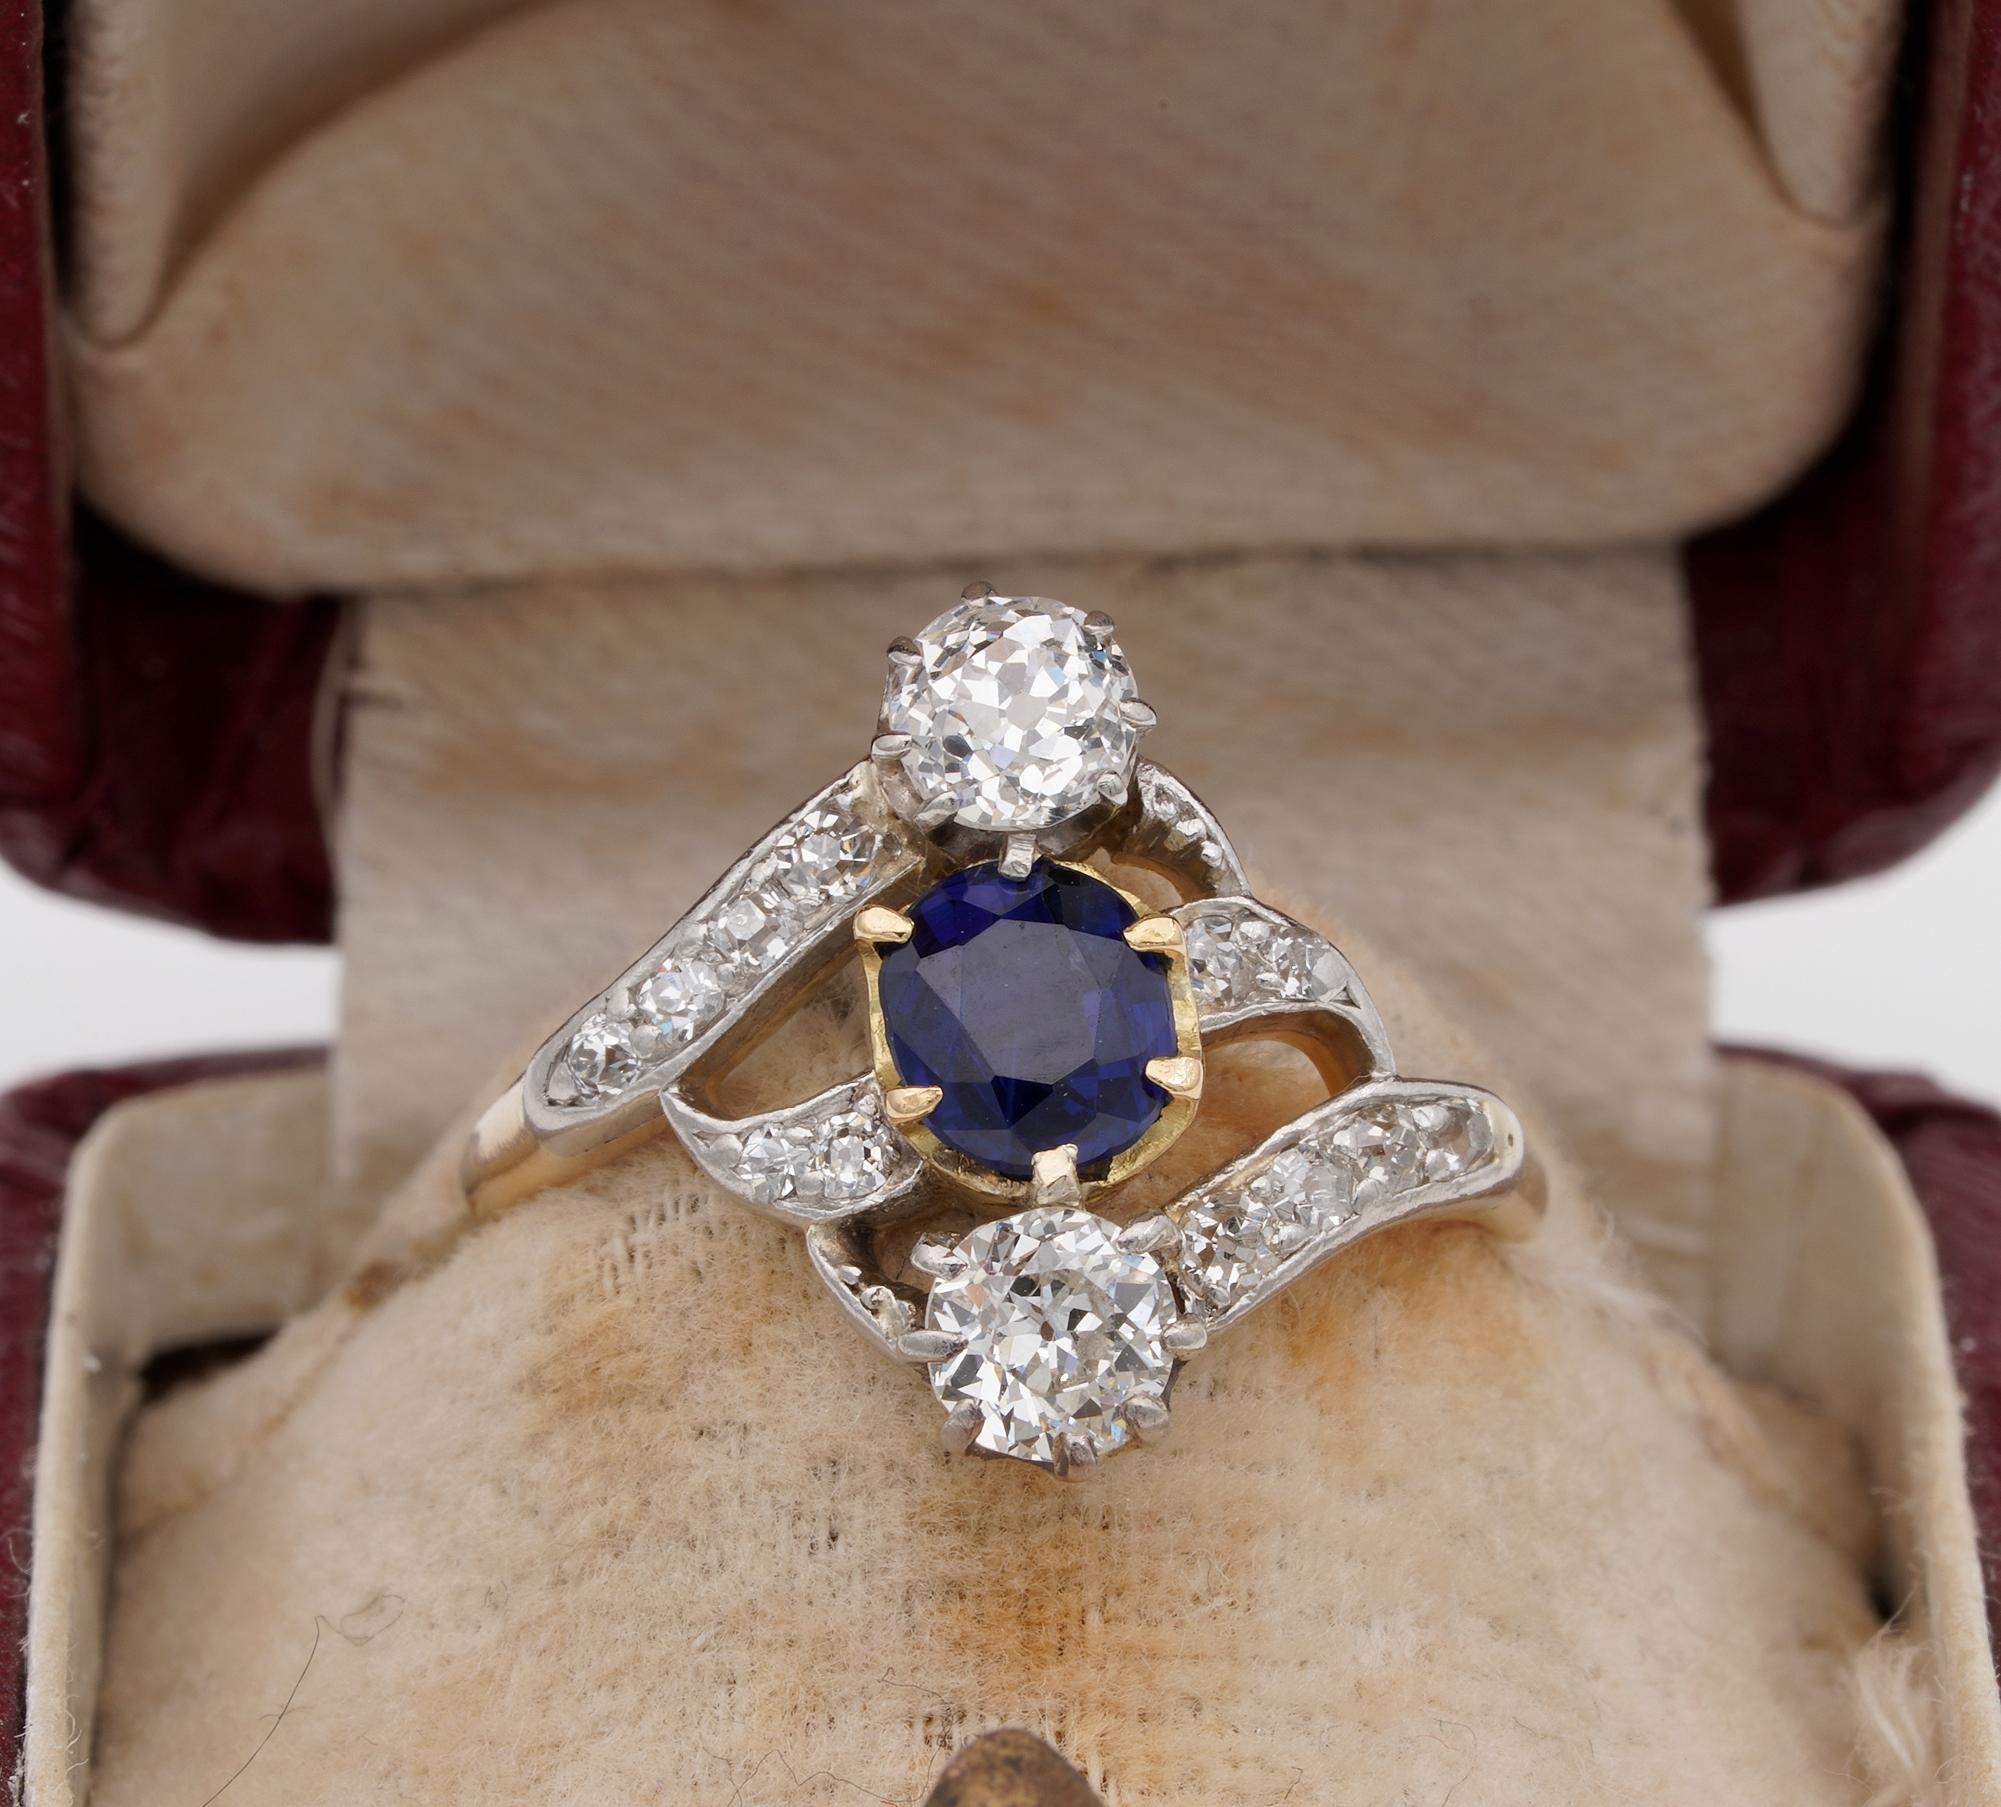 Appealing Art Nouveau period Diamond and Sapphire ring, 1900 ca
Hand crafted of solid Platinum and 18 KT gold, unmarked
Exquisite example epitome of the eternal elegance expressing in full the elegant fashion of that time
Set with a central natural